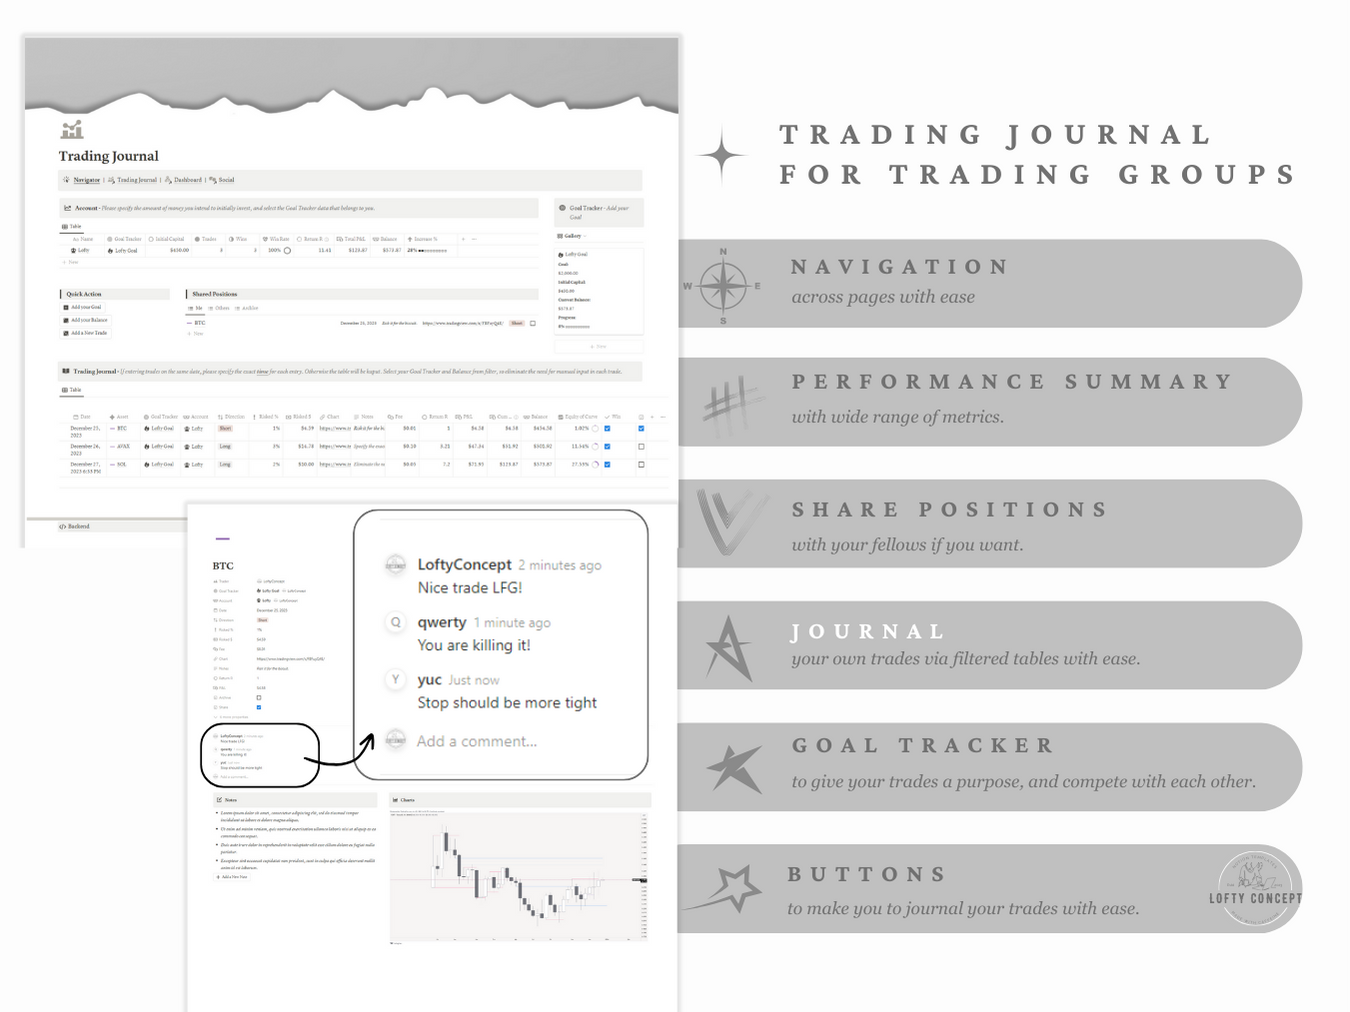 Multi-trader Trading Journal | Trading Space for Trading Groups | Trading Journal for Mentorships | Crypto | Forex
Multitrader Notion Trading Journal template that provides a trading space for multiple traders at the same time with carefully crafted features.